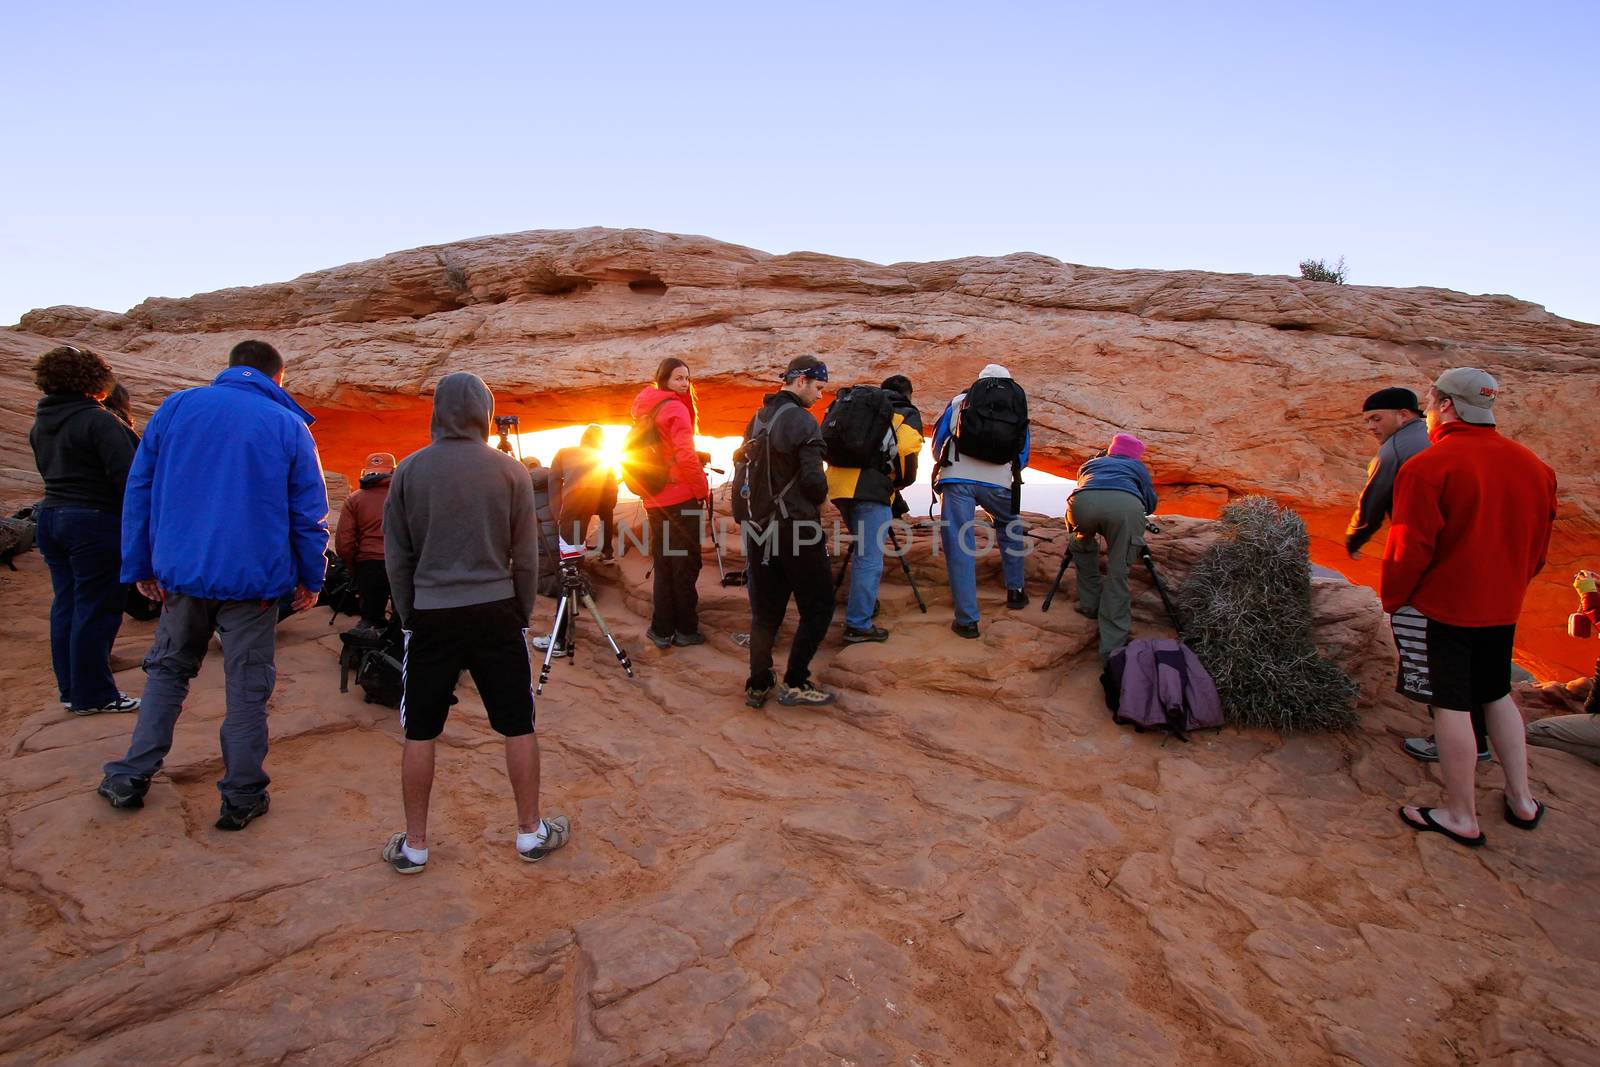 Photographers and tourists watching sunrise at  Mesa Arch, Canyonlands National Park, Utah